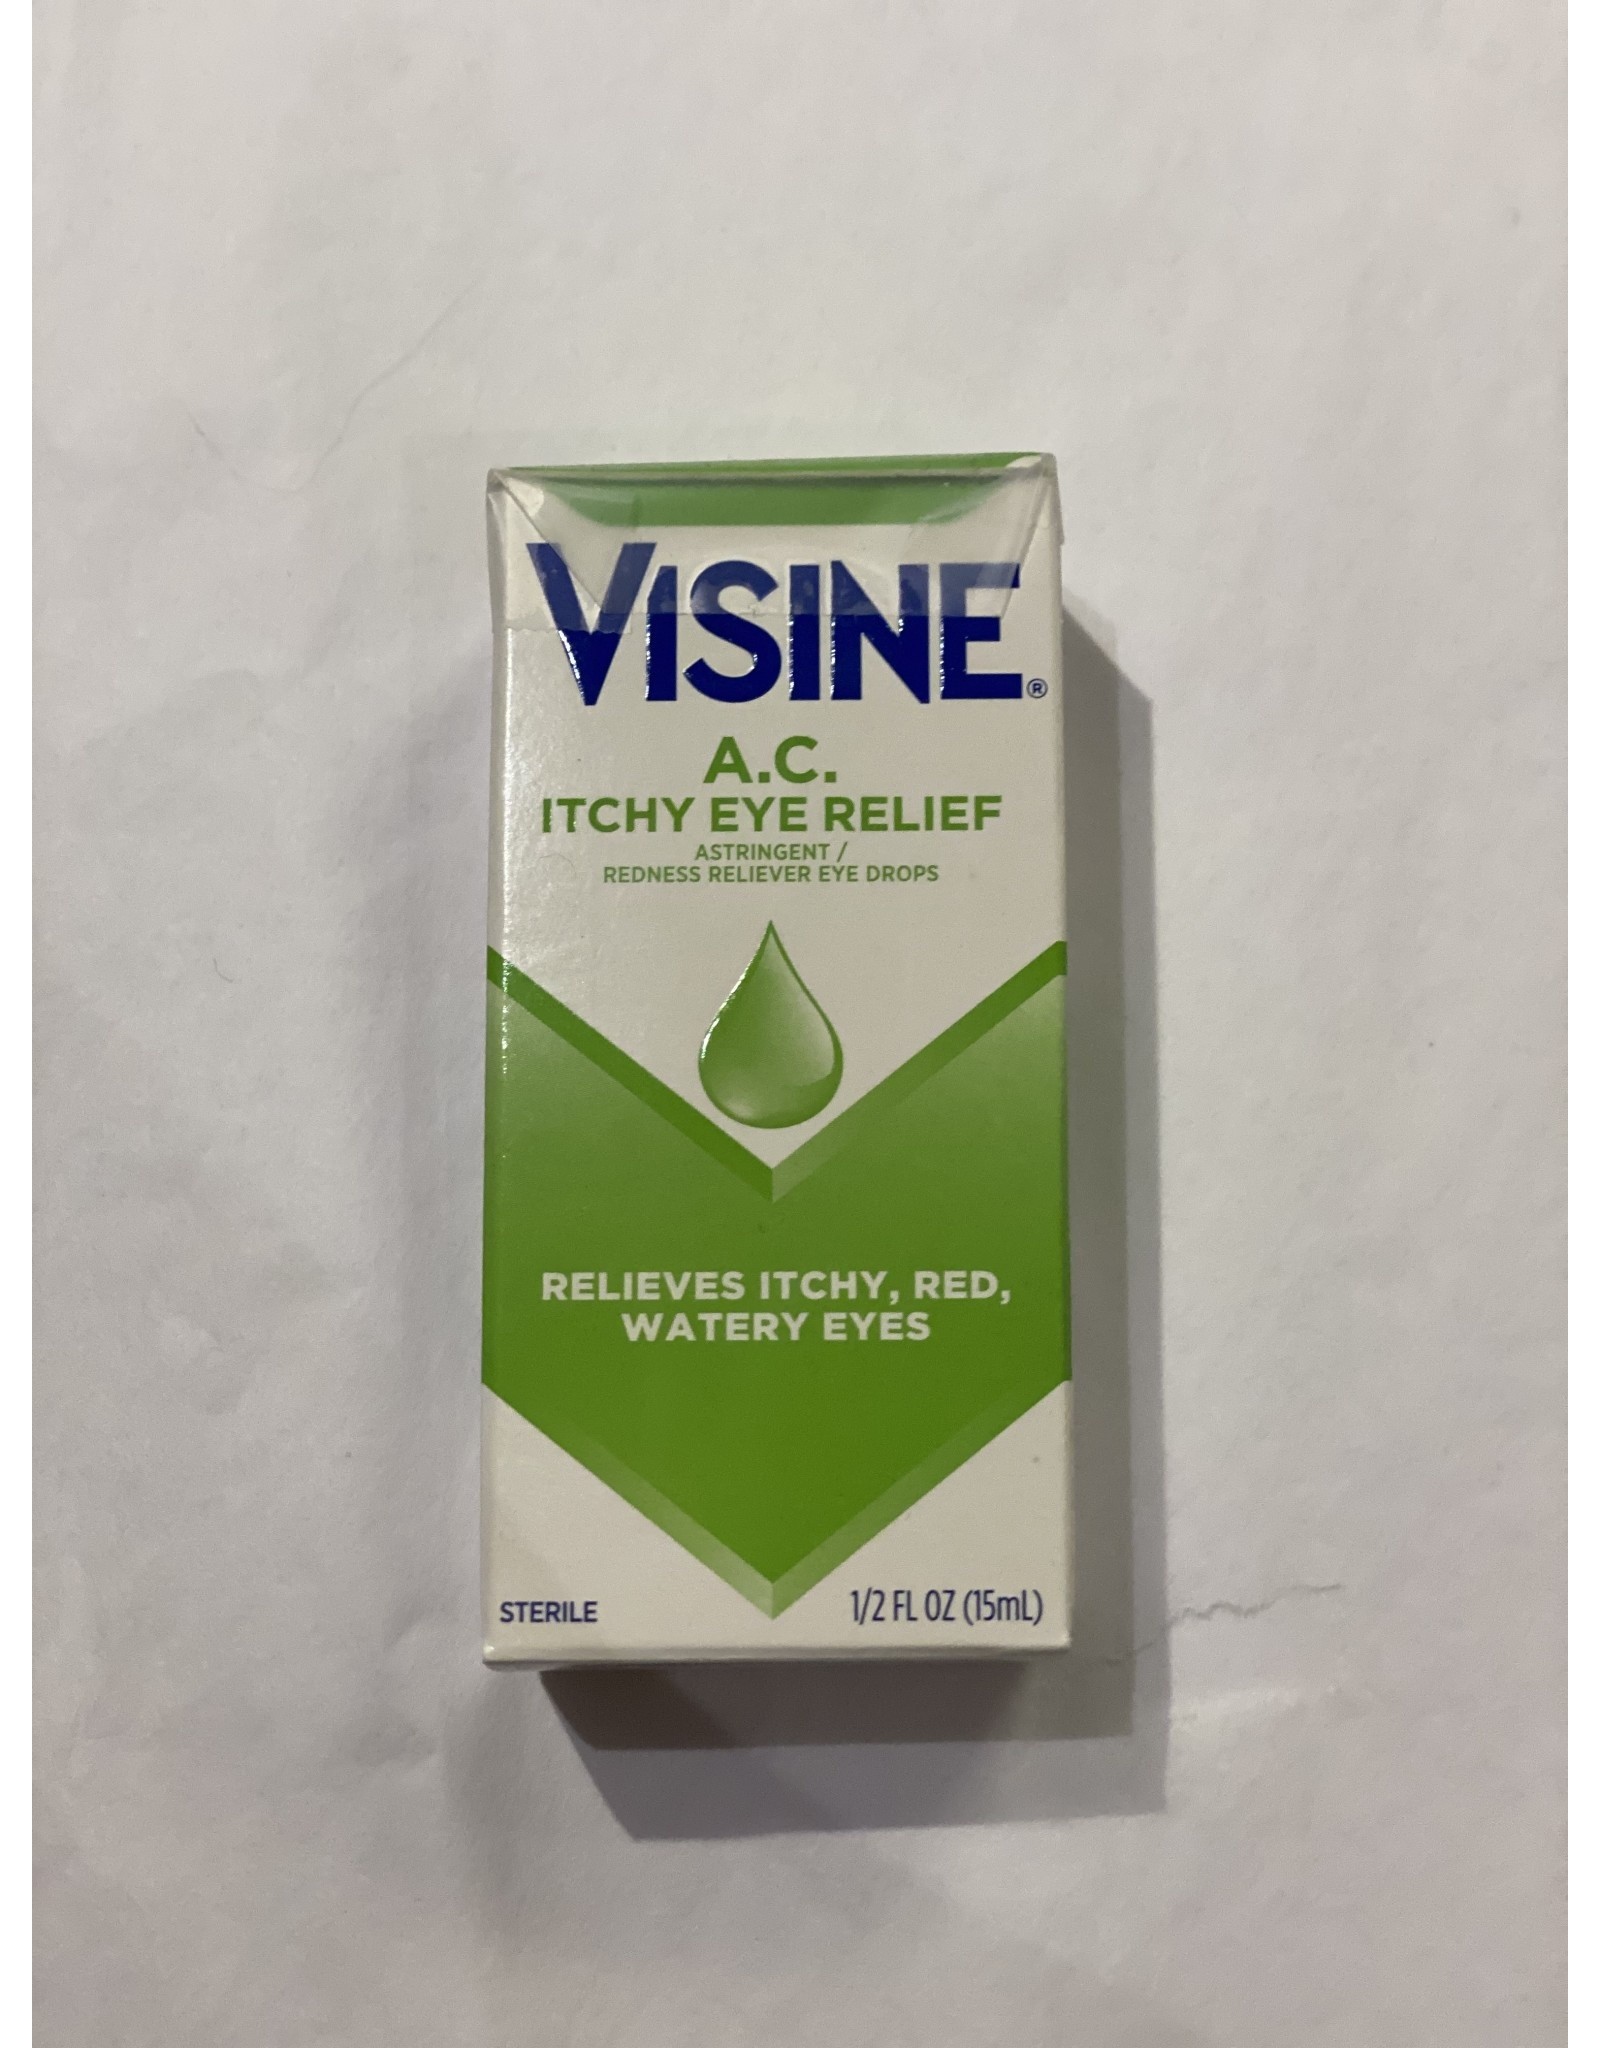 Visine A.C. Itchy Eye Relief